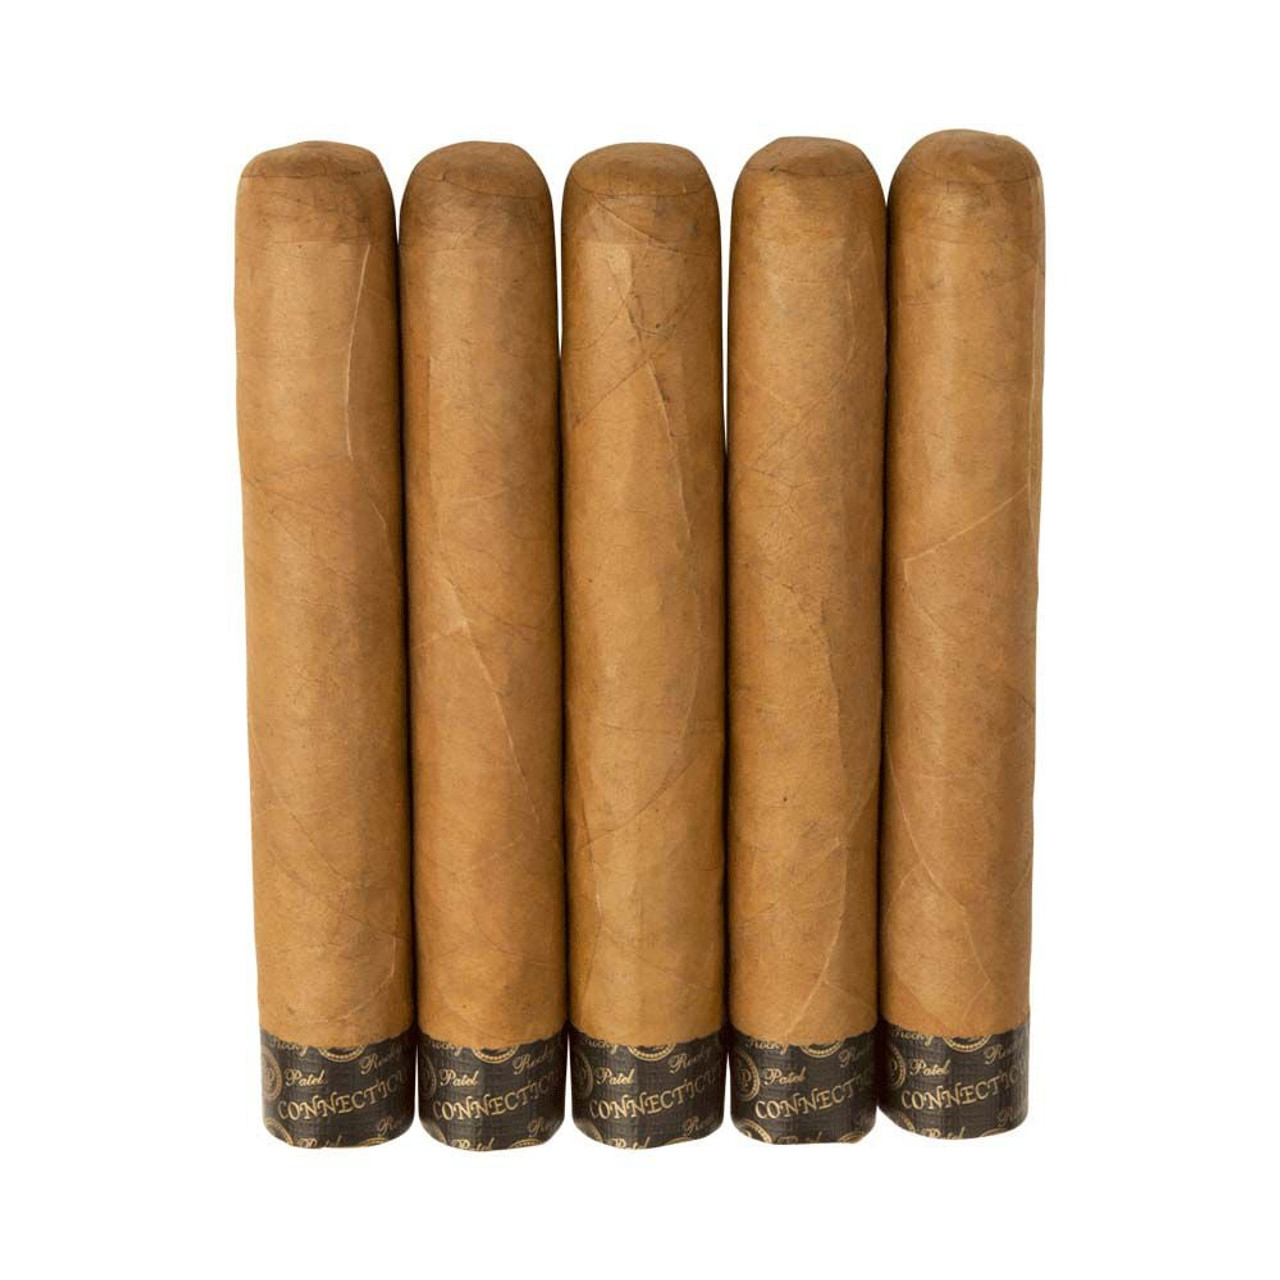 Rocky Patel The Edge Connecticut Gran Robusto Cigars - 5.5 x 54 (Pack of 5) *Box